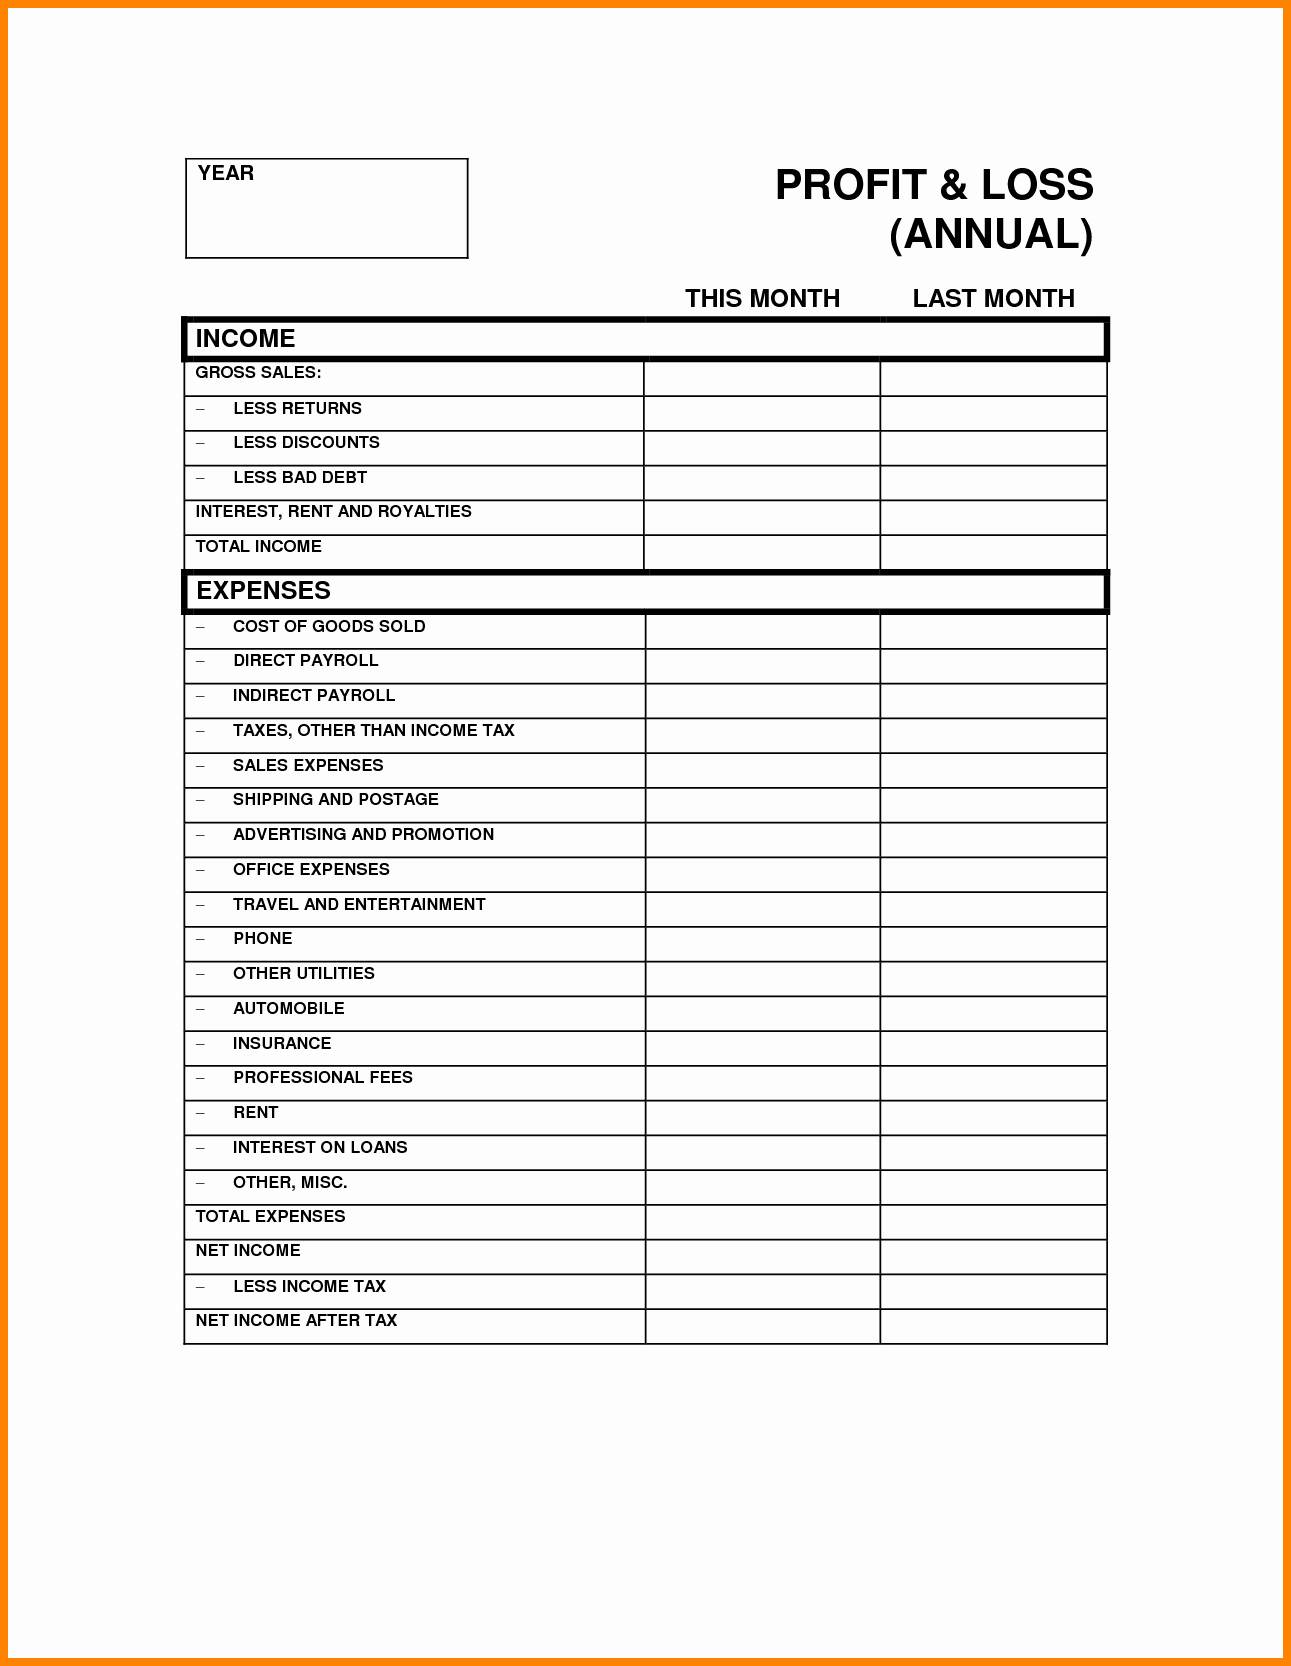 Basic Profit and Loss Template Luxury Basic Profit and Loss Statement Template